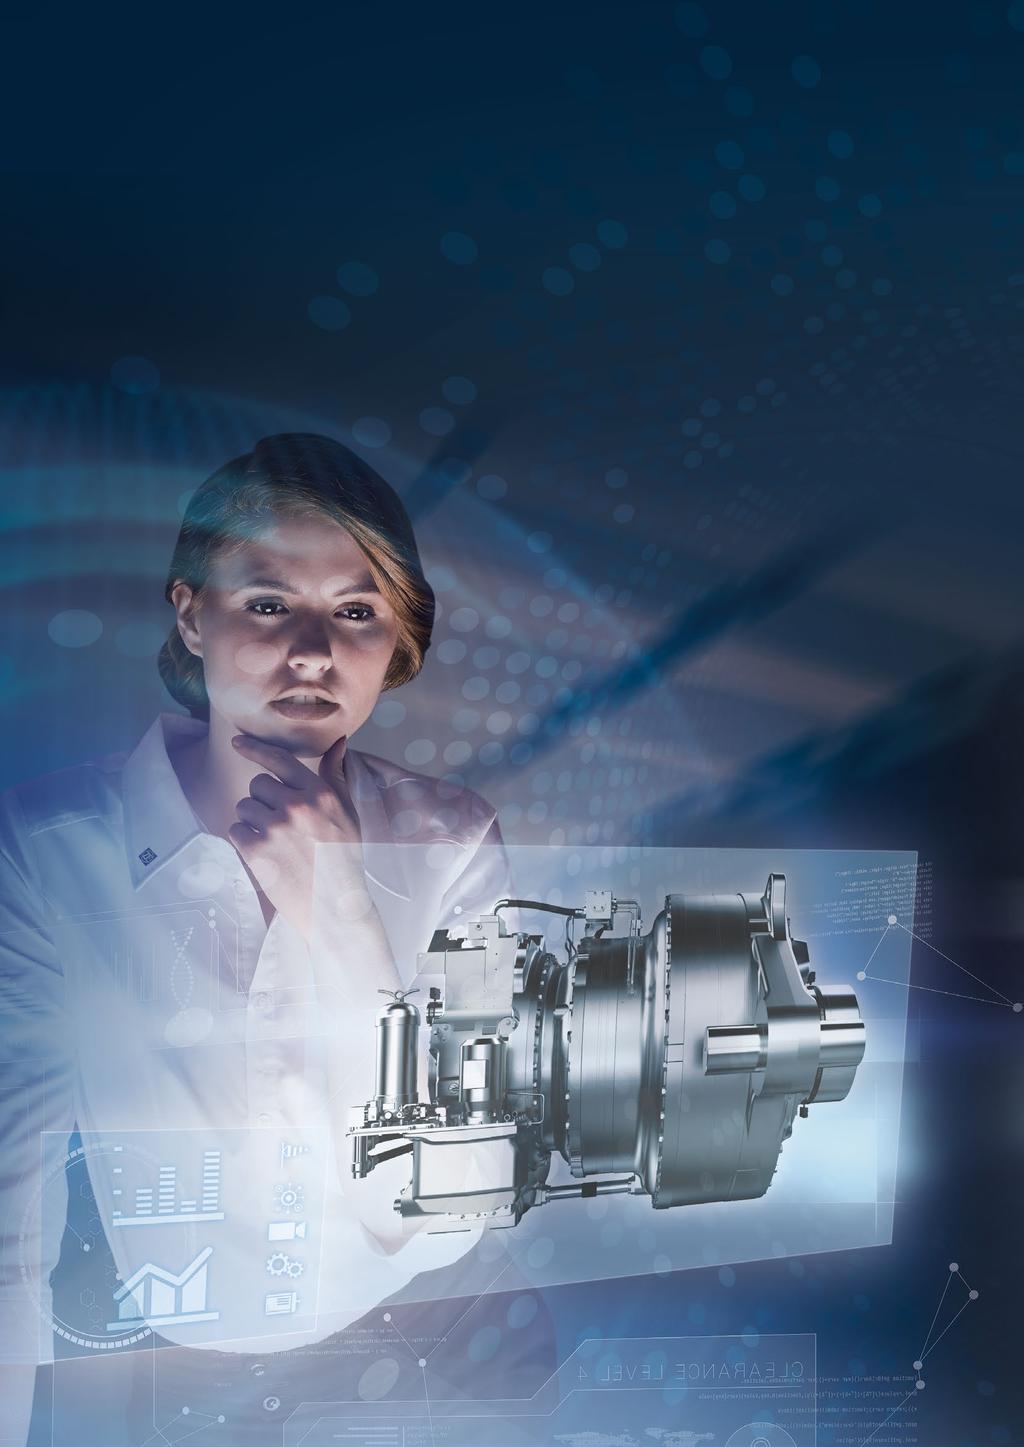 10 Digitalization As a continuous innovator, ZF is preparing for the next generation of wind turbine gearboxes and intelligent connection solutions that will further improve the Levelized Cost of